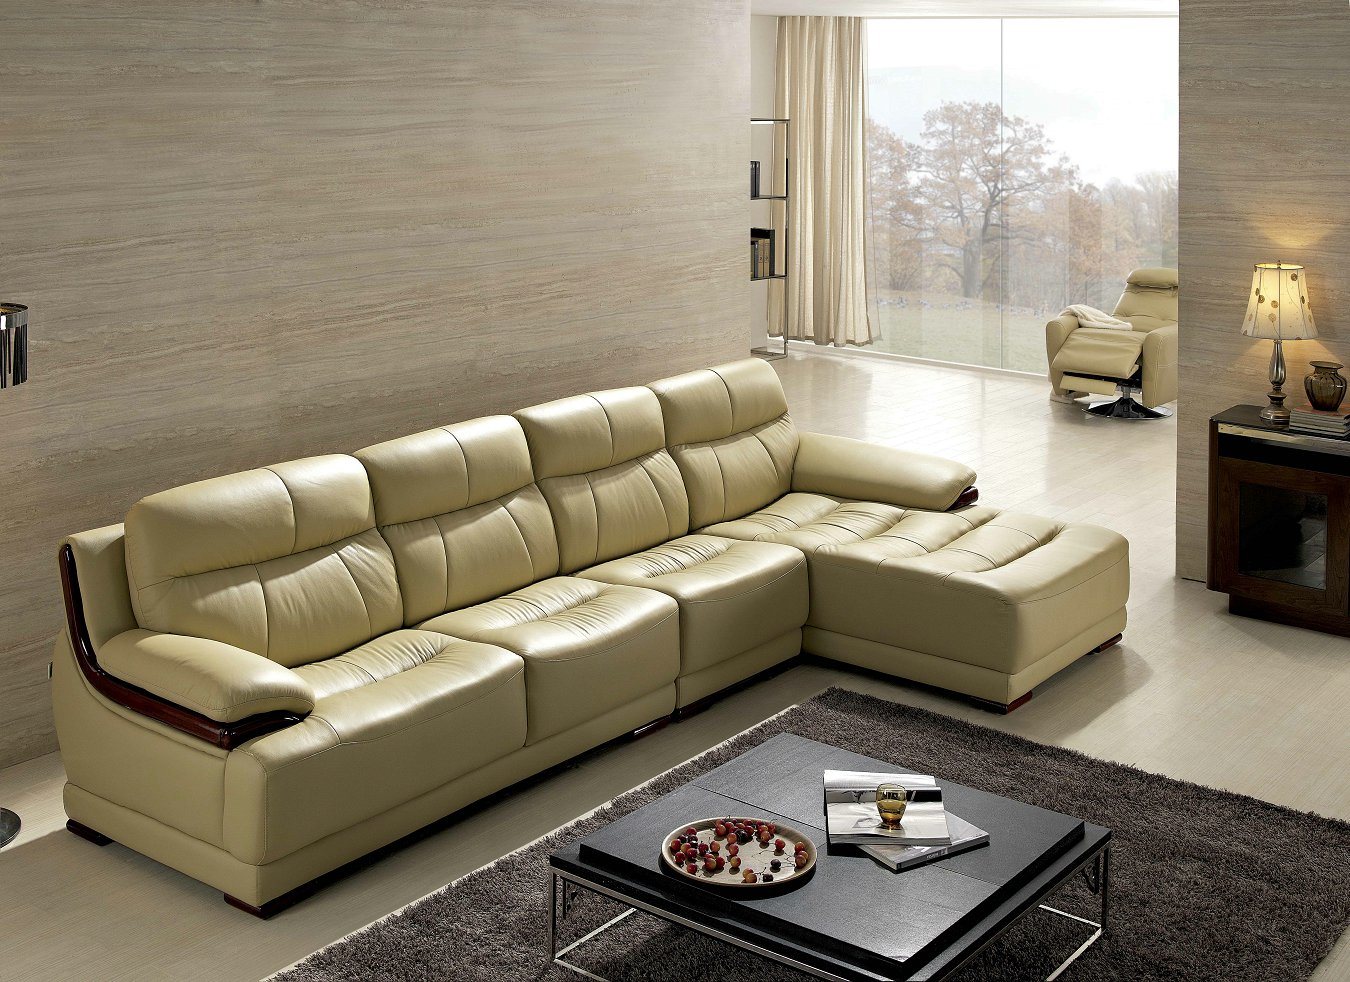 Chinese Mordern Leather Upholstered L Shape Sofa